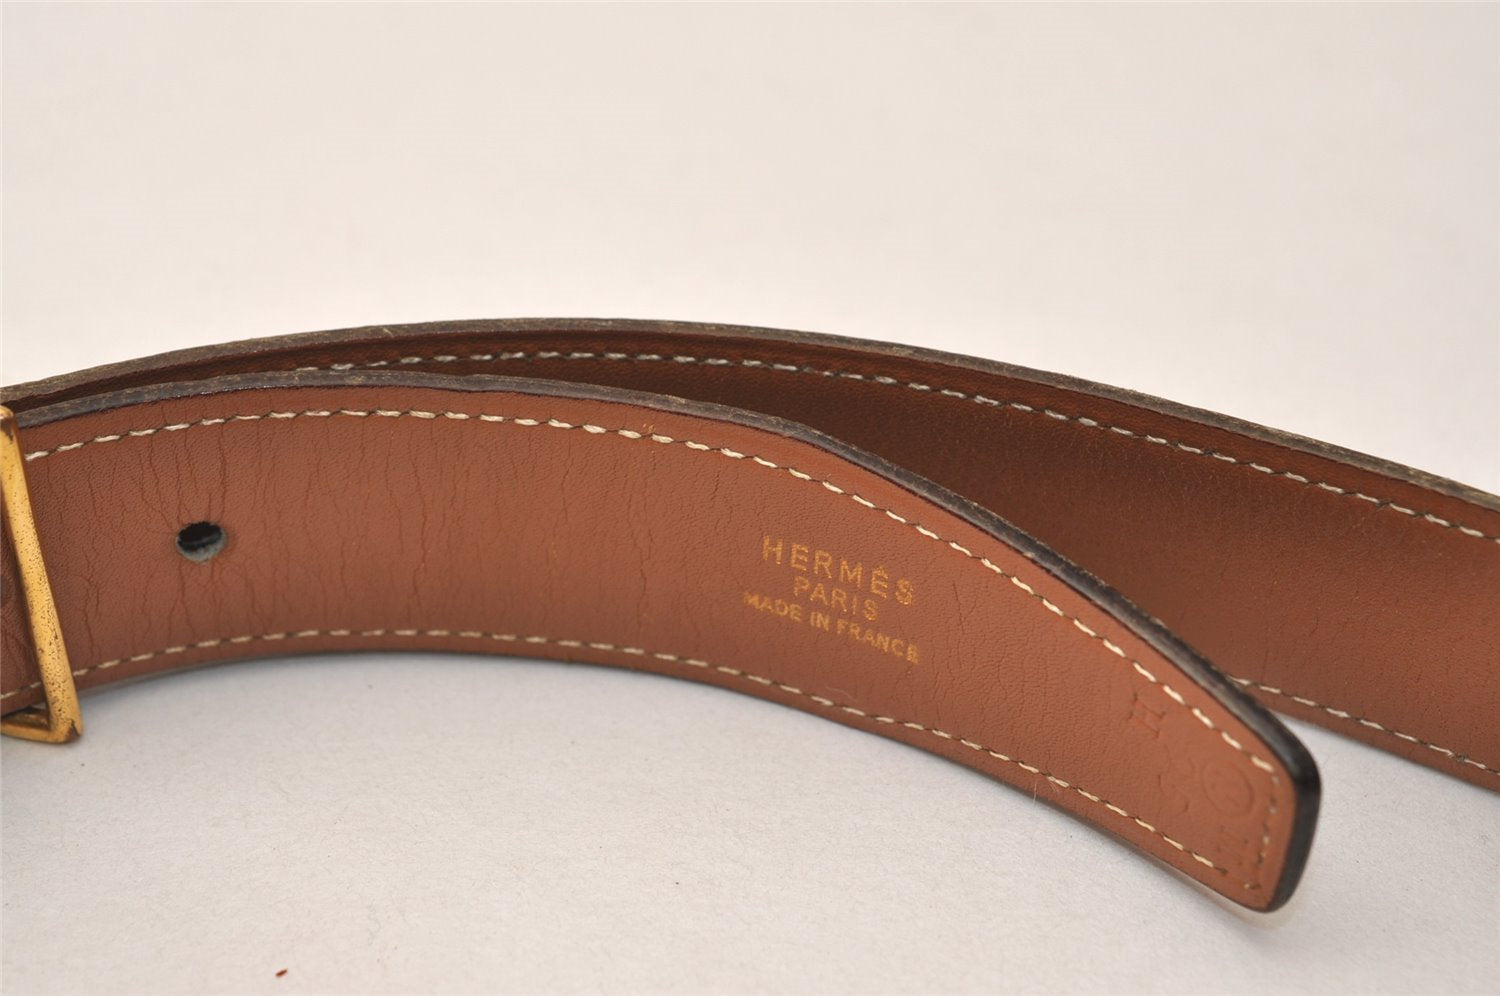 Authentic HERMES Leather Belt Reversible 35.8-37.4